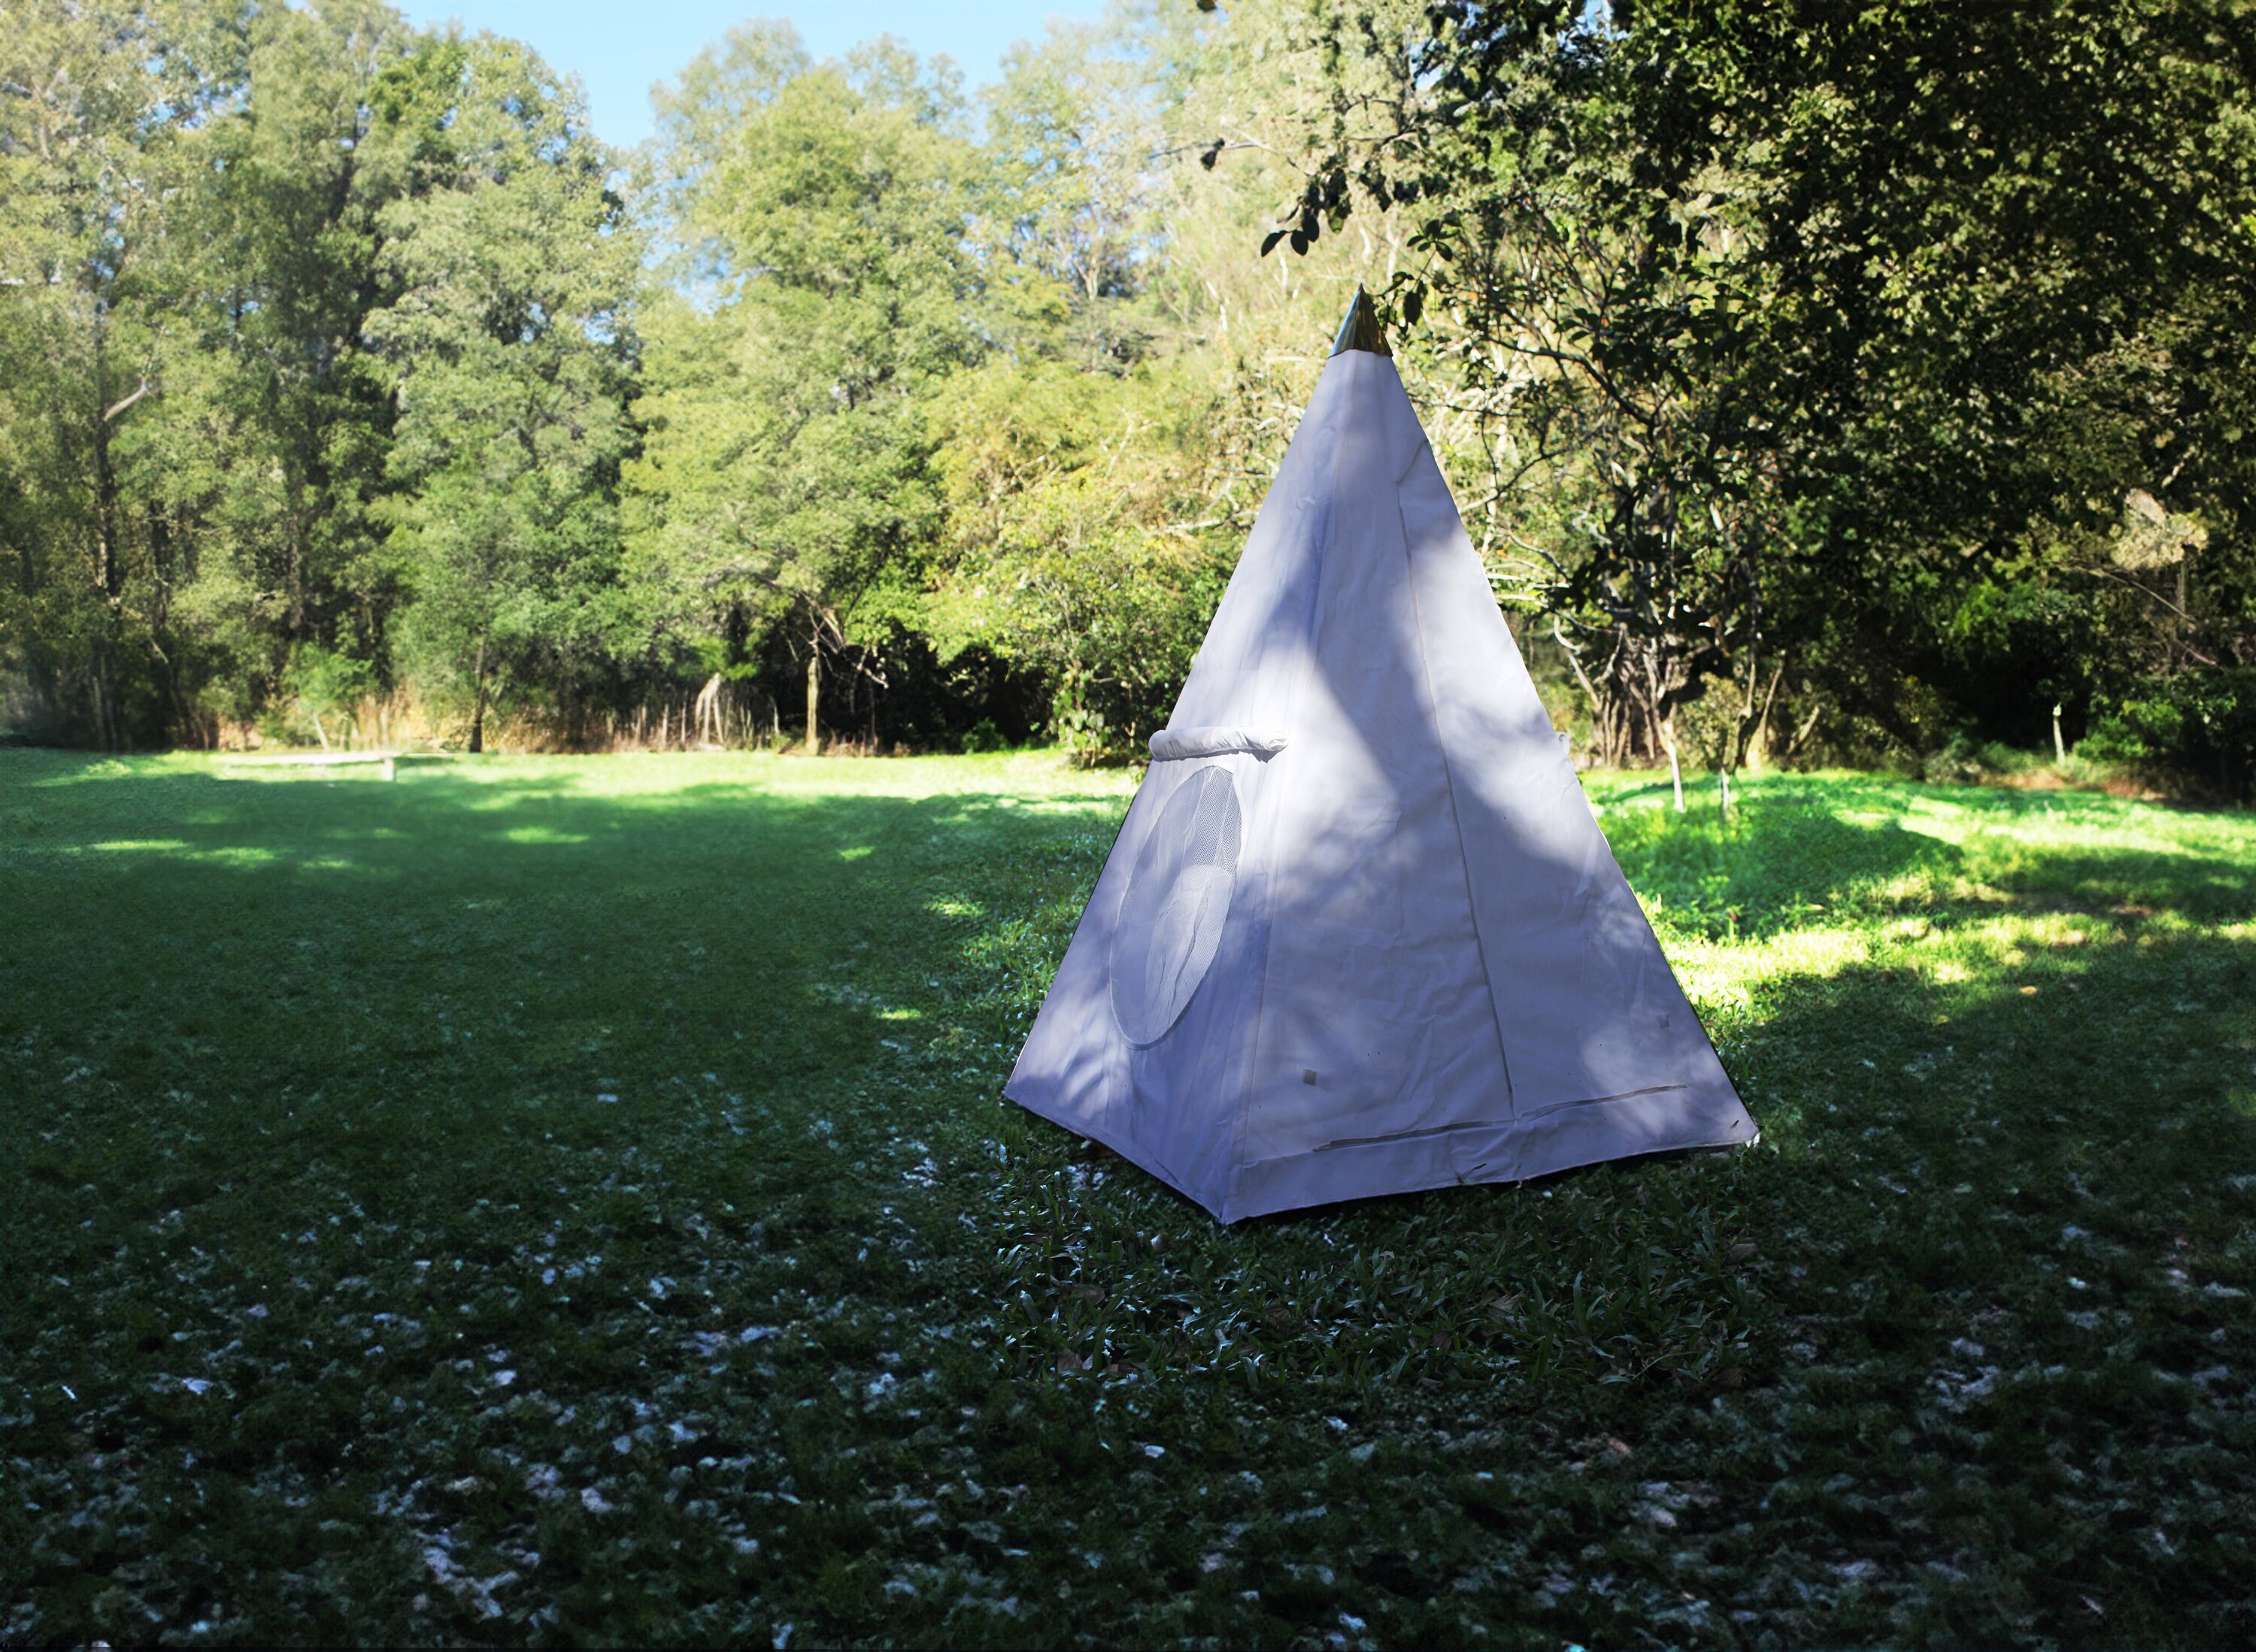 Spray Paint Tent, Large Spray Shelter With 4 X Painters Pyramid 